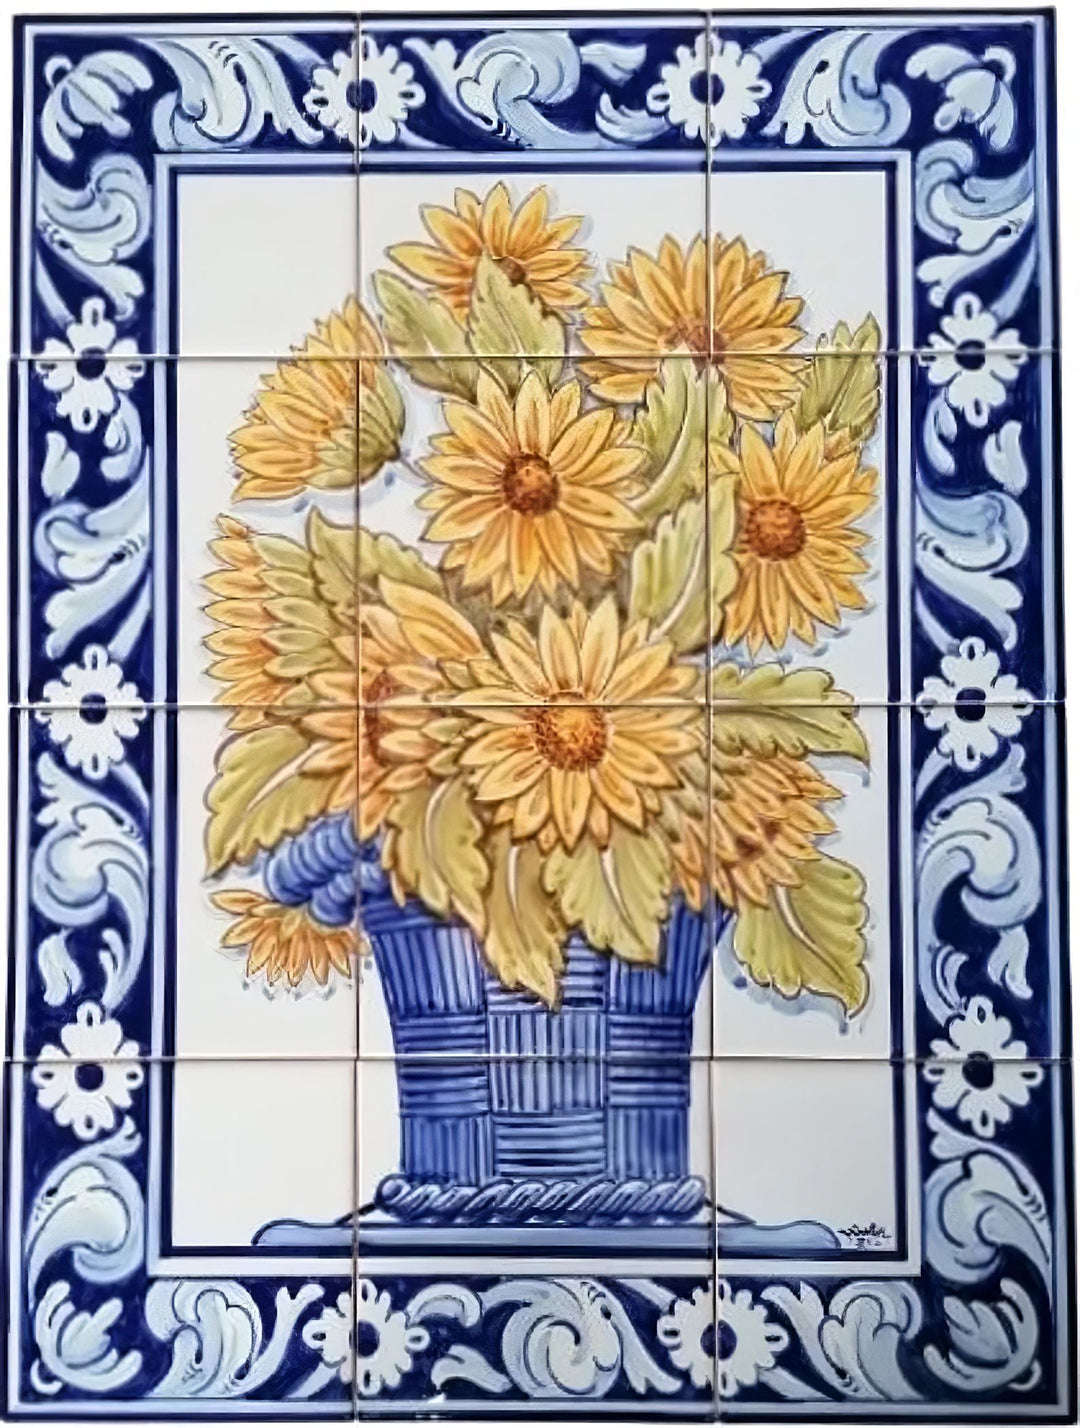 Tile Mural "Sunflowers" - Hand Painted & Signed by Artist | Ref. PT302